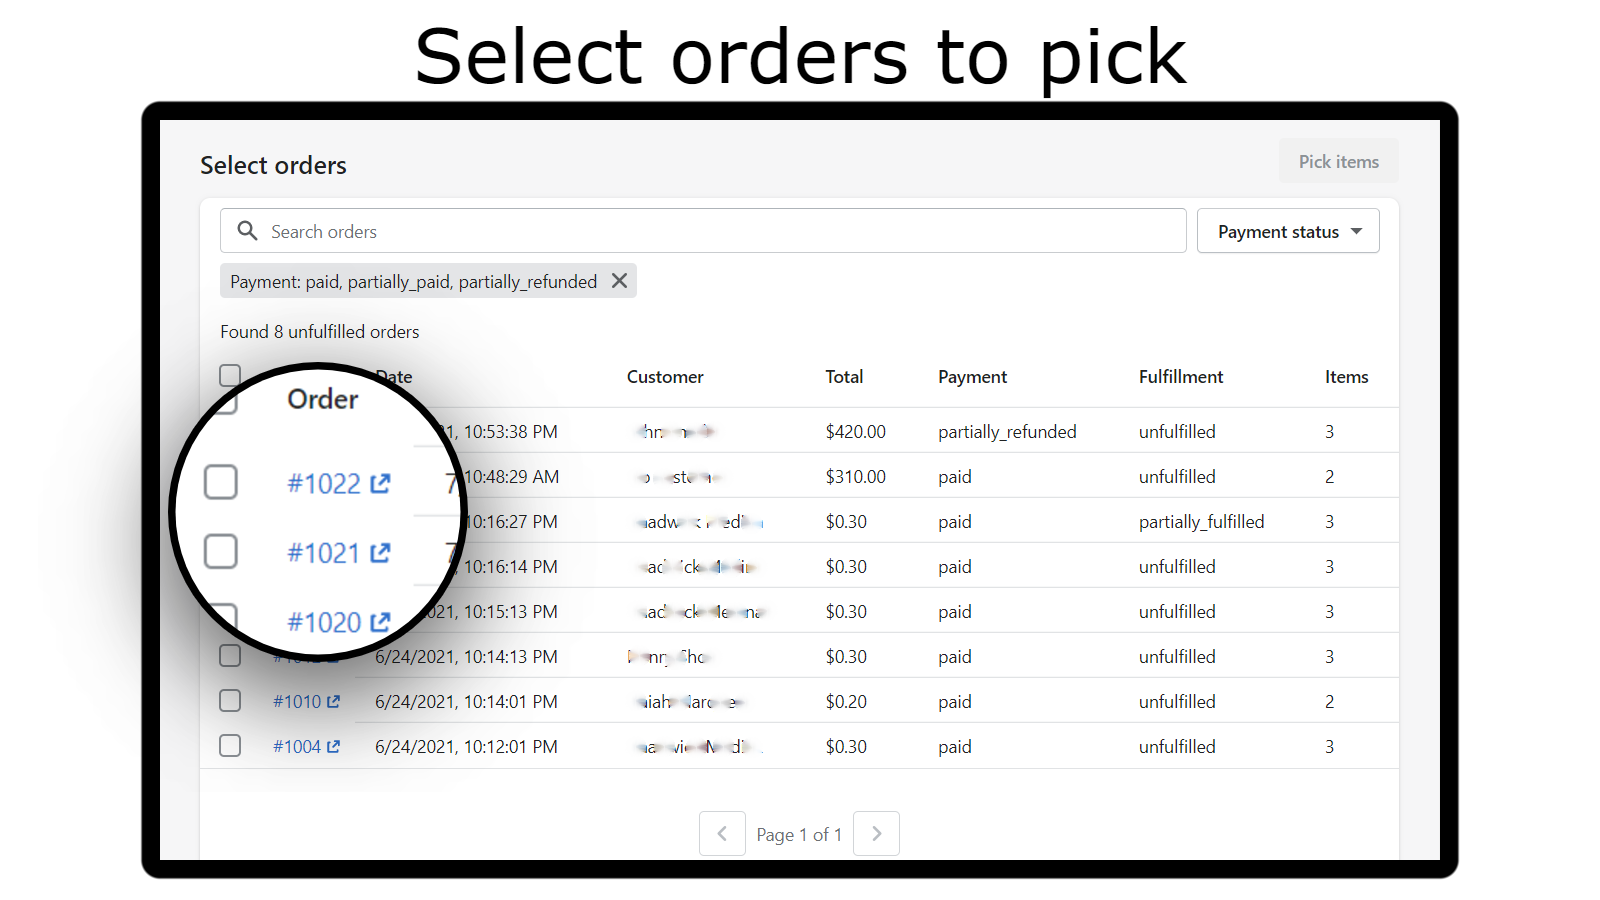 Select orders within the app